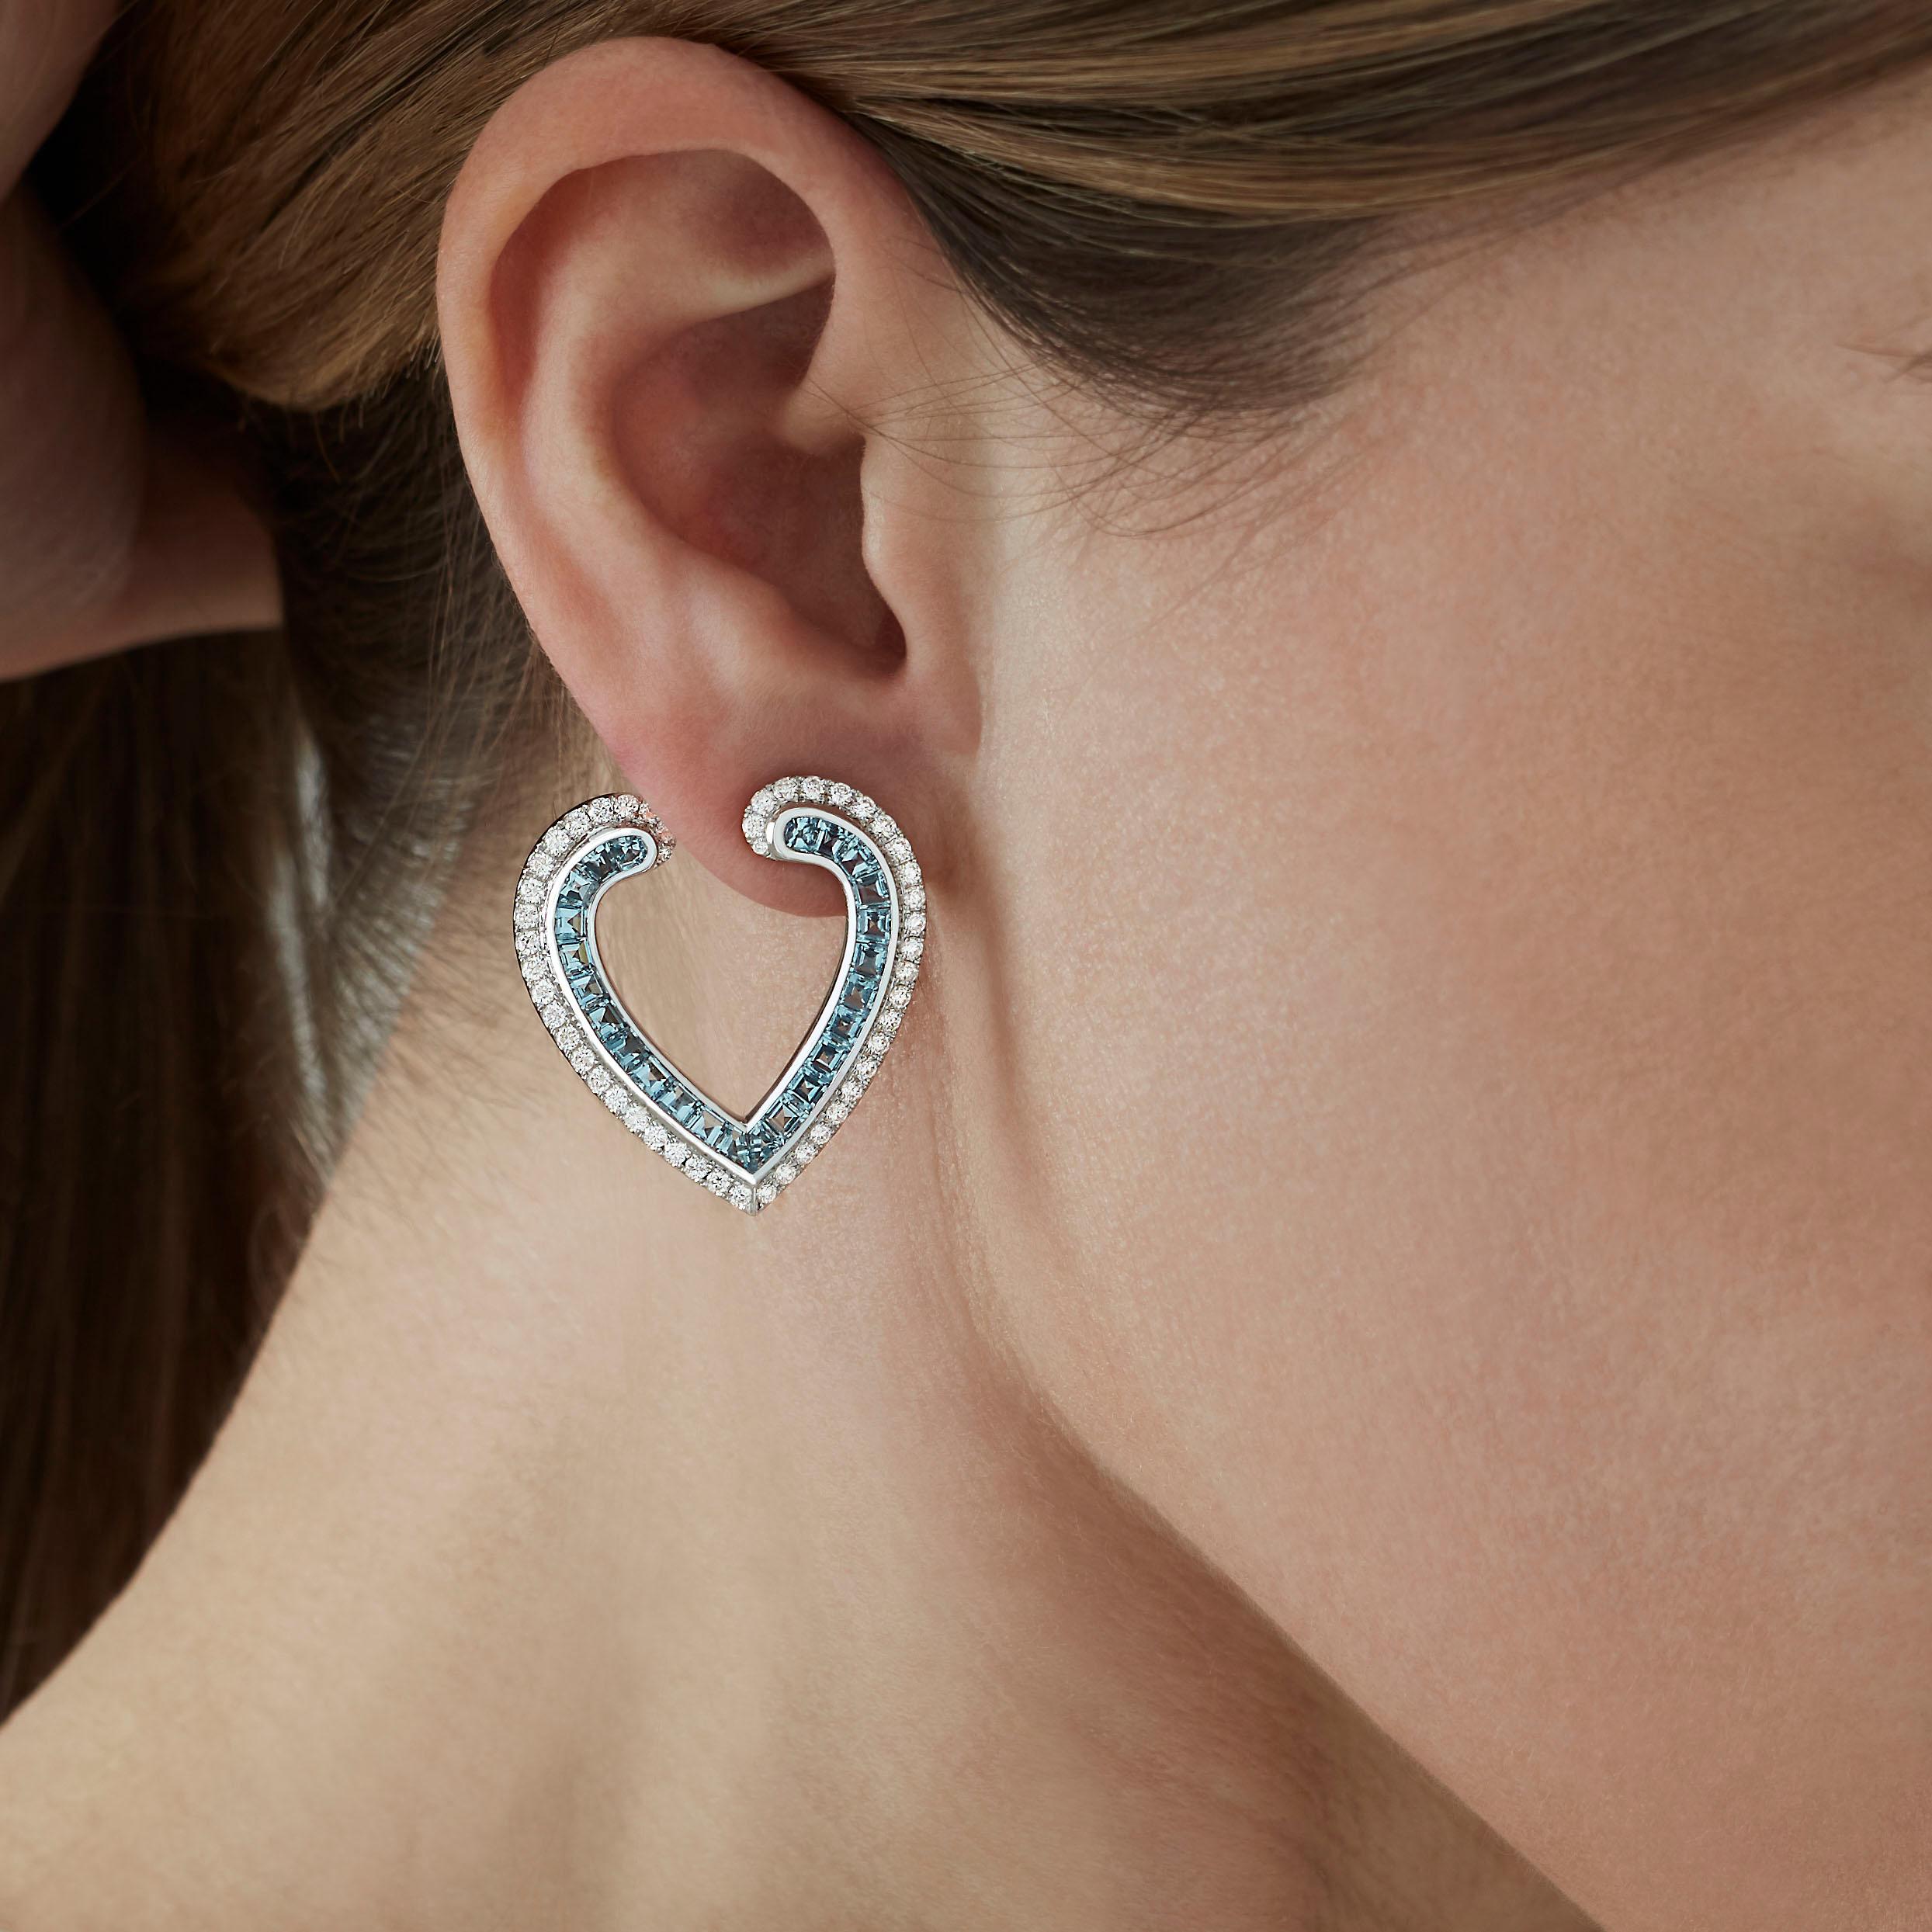 A House of Garrard pair of 18ct white gold earrings from the 'Aloria' collection, set with round white diamonds and calibre cut aquamarines. 

96 round white diamonds weighing: 1.40cts 
48 calibre cut aquamarines weighing: 2.80cts

The House of